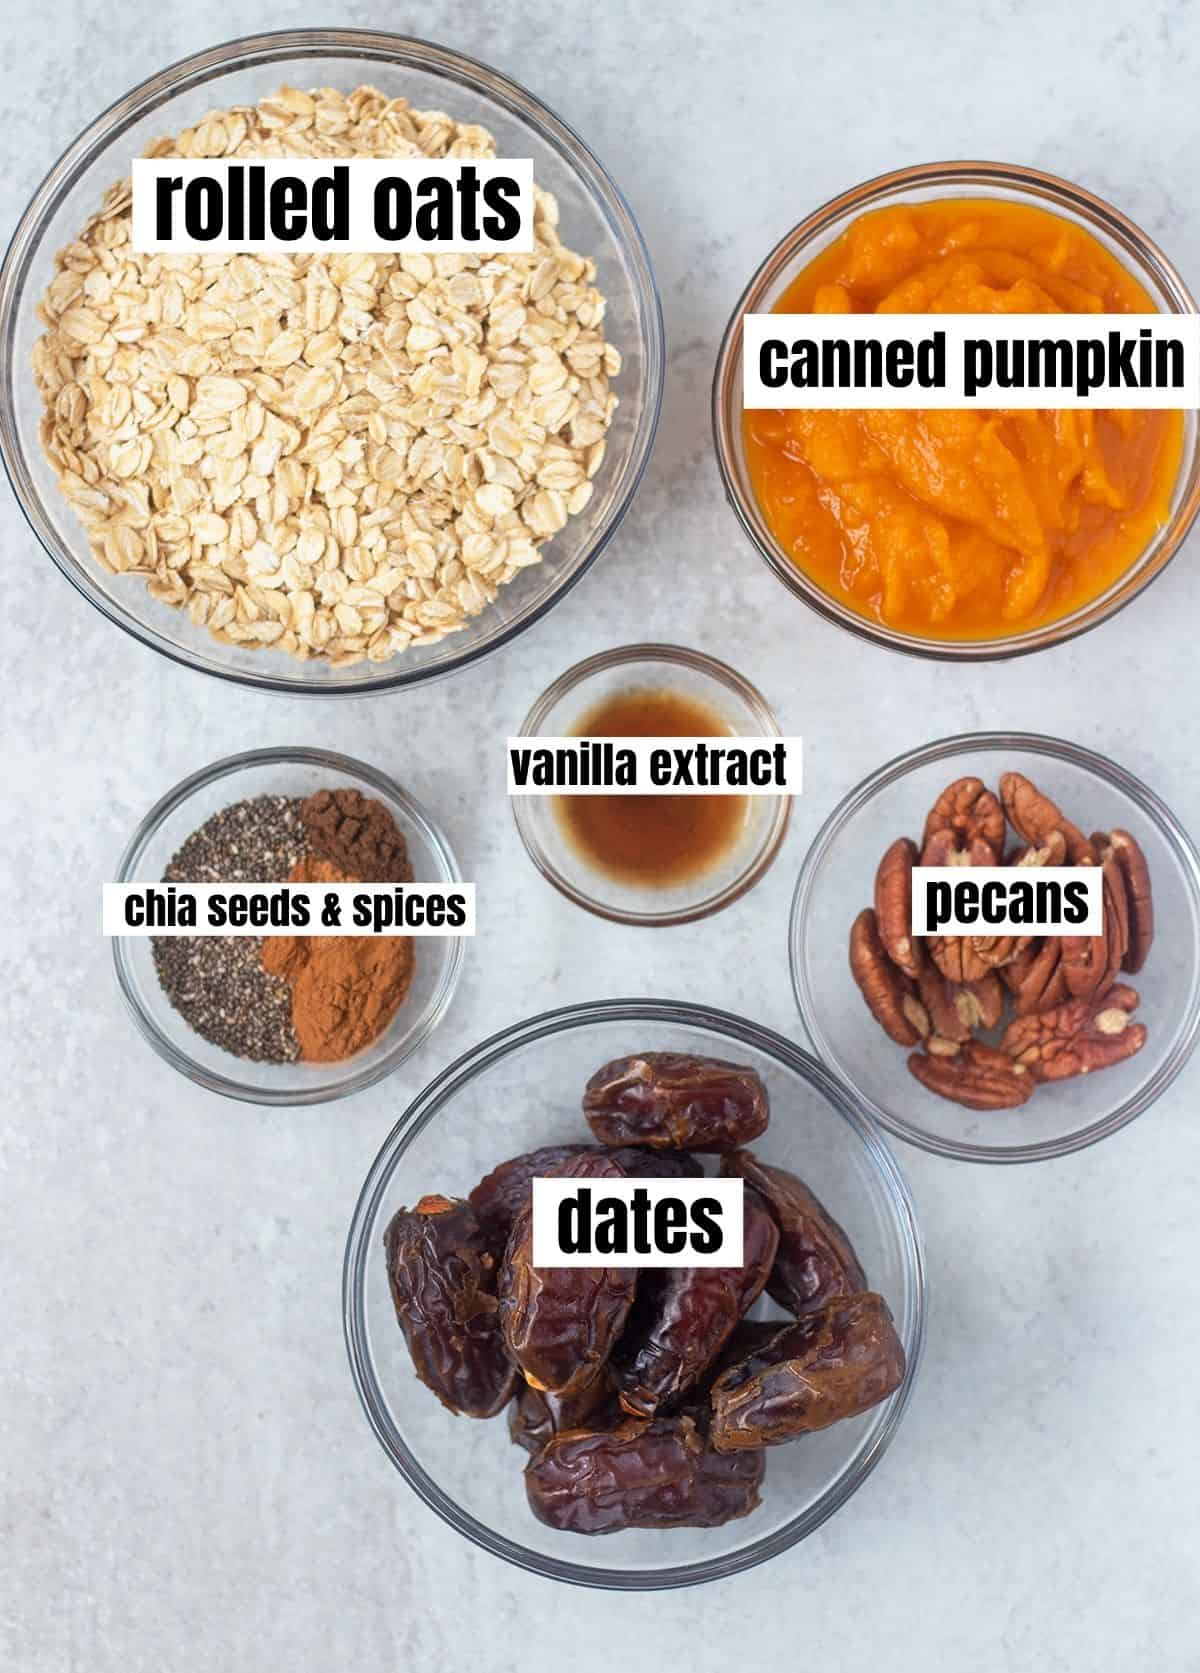 rolled oats, canned pumpkin, vanilla extract, chia seeds, seasonings pecans, and dates